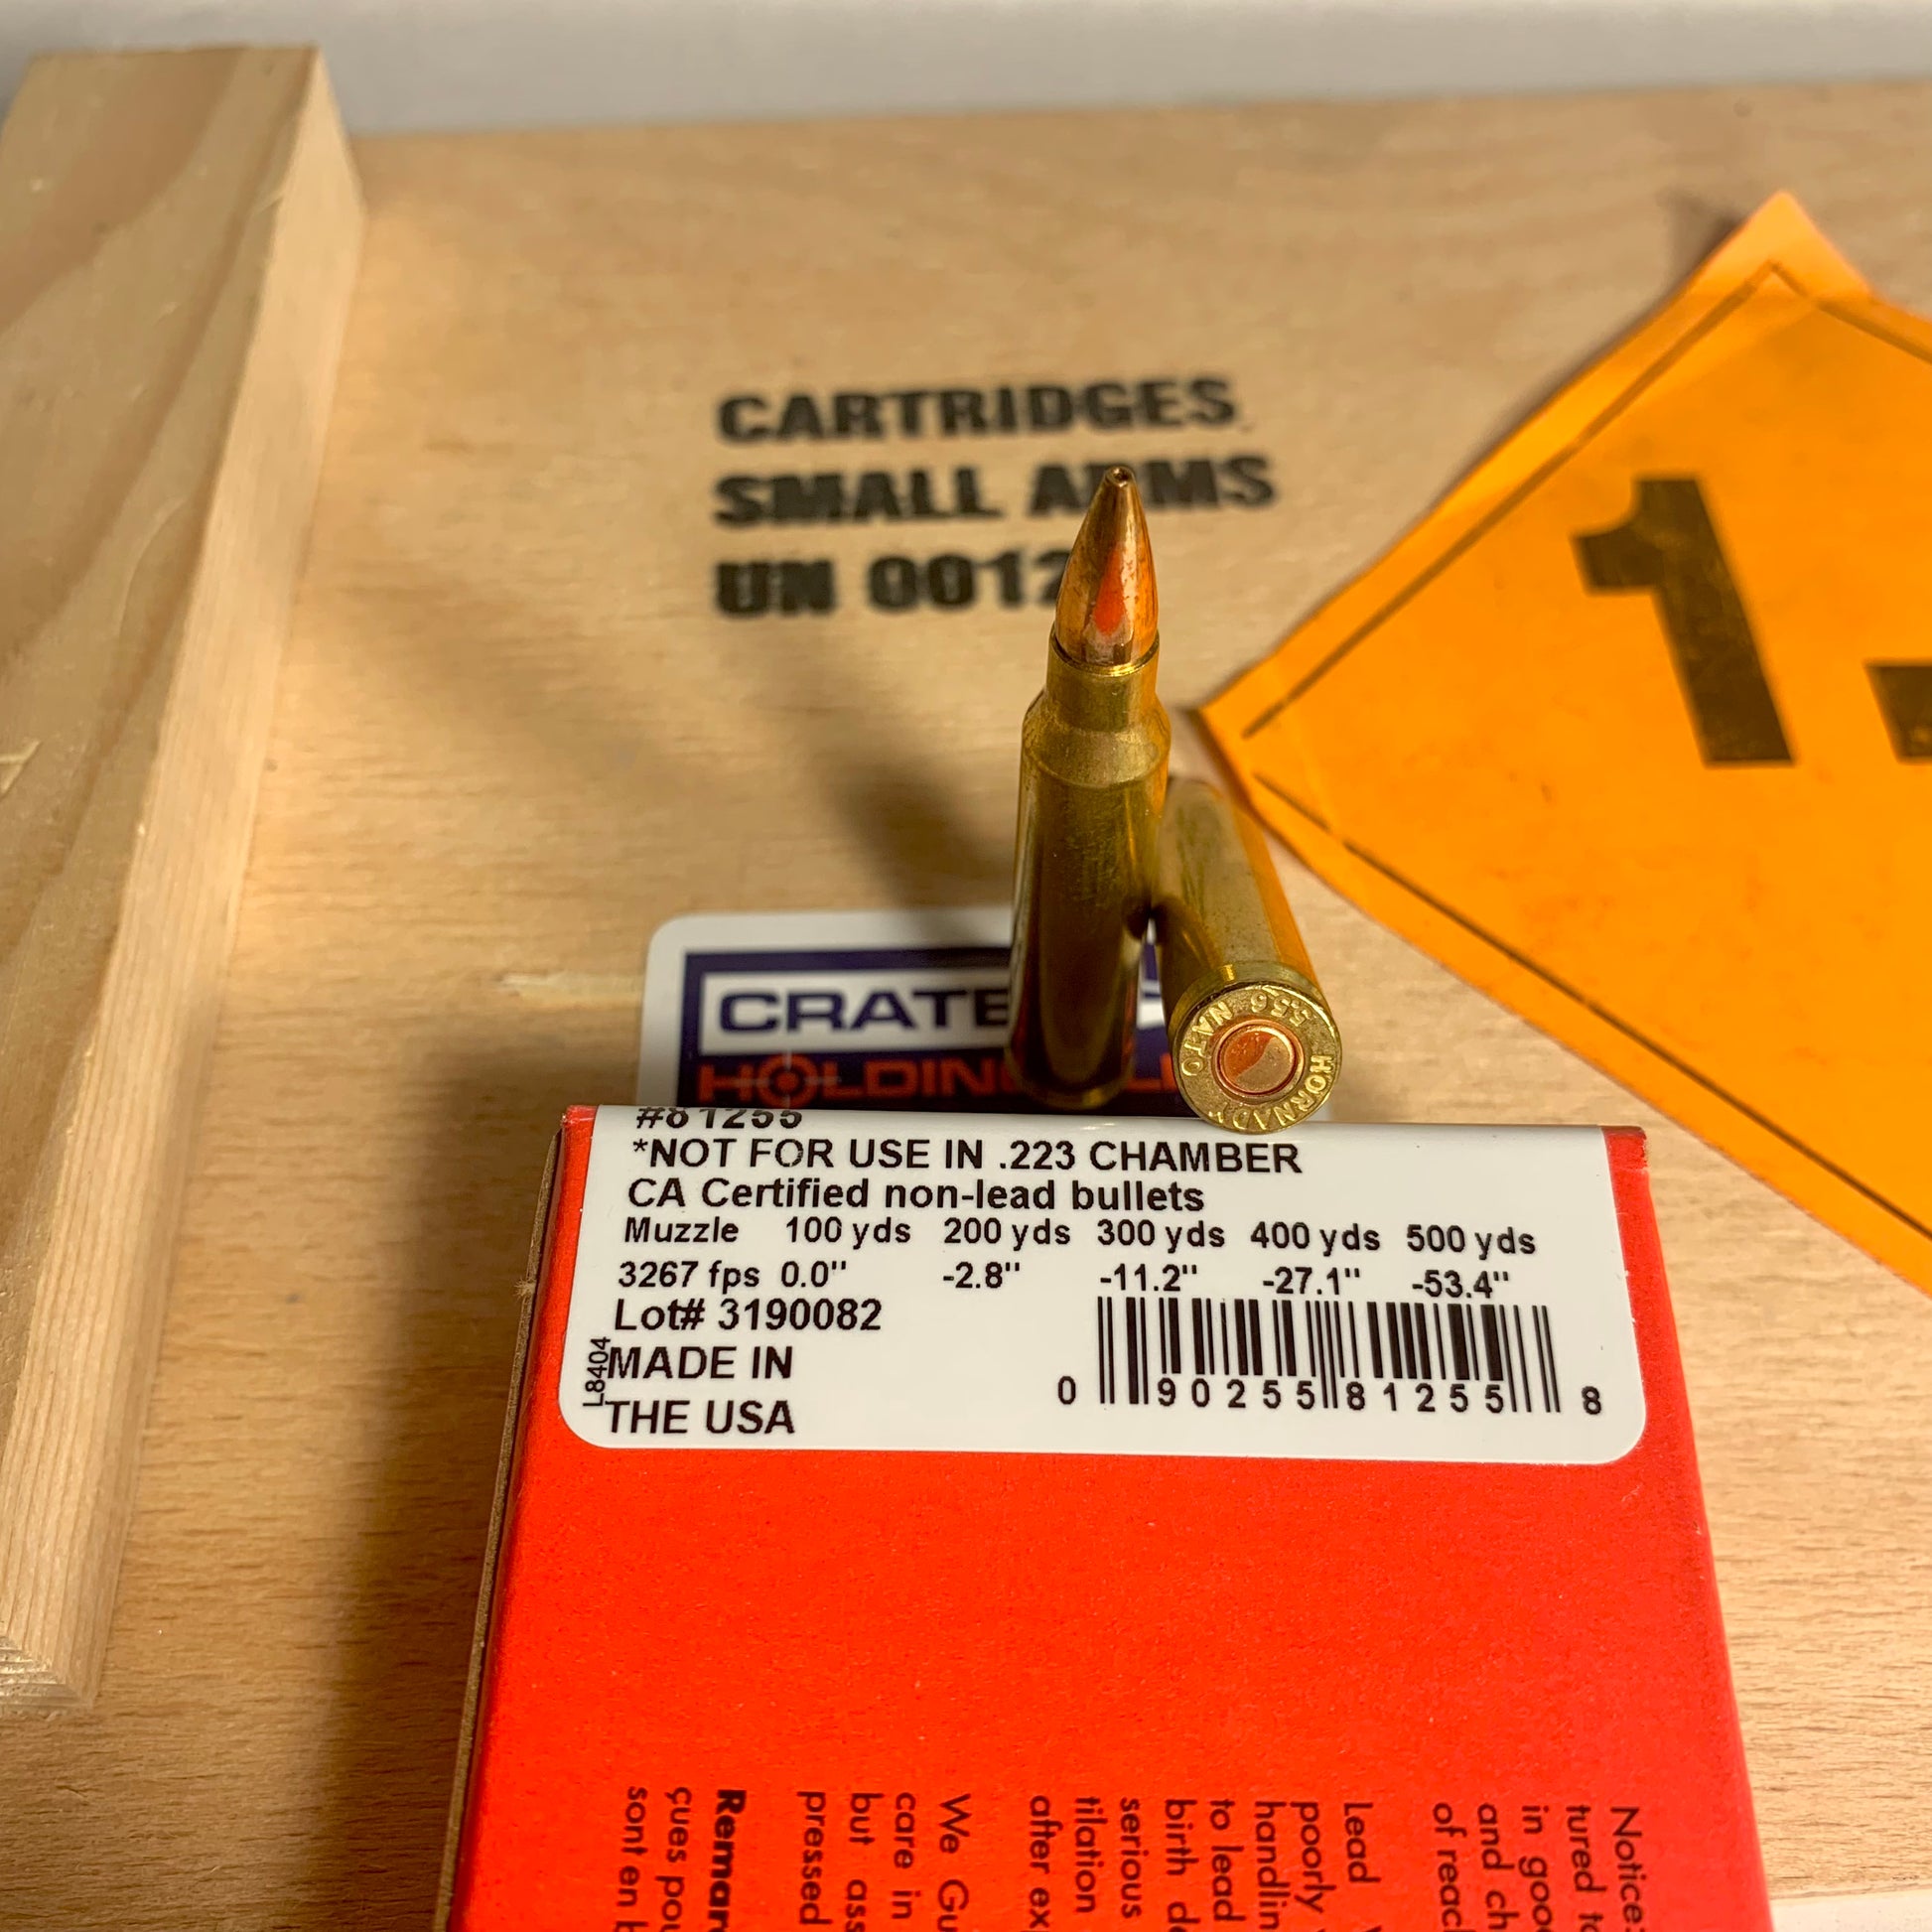 20 Round Hornady TAP 5.56 NATO Ammo 55gr GMX Barrier - 81255- [LE TRADE IN - NO CREDENTIALS REQUIRED]